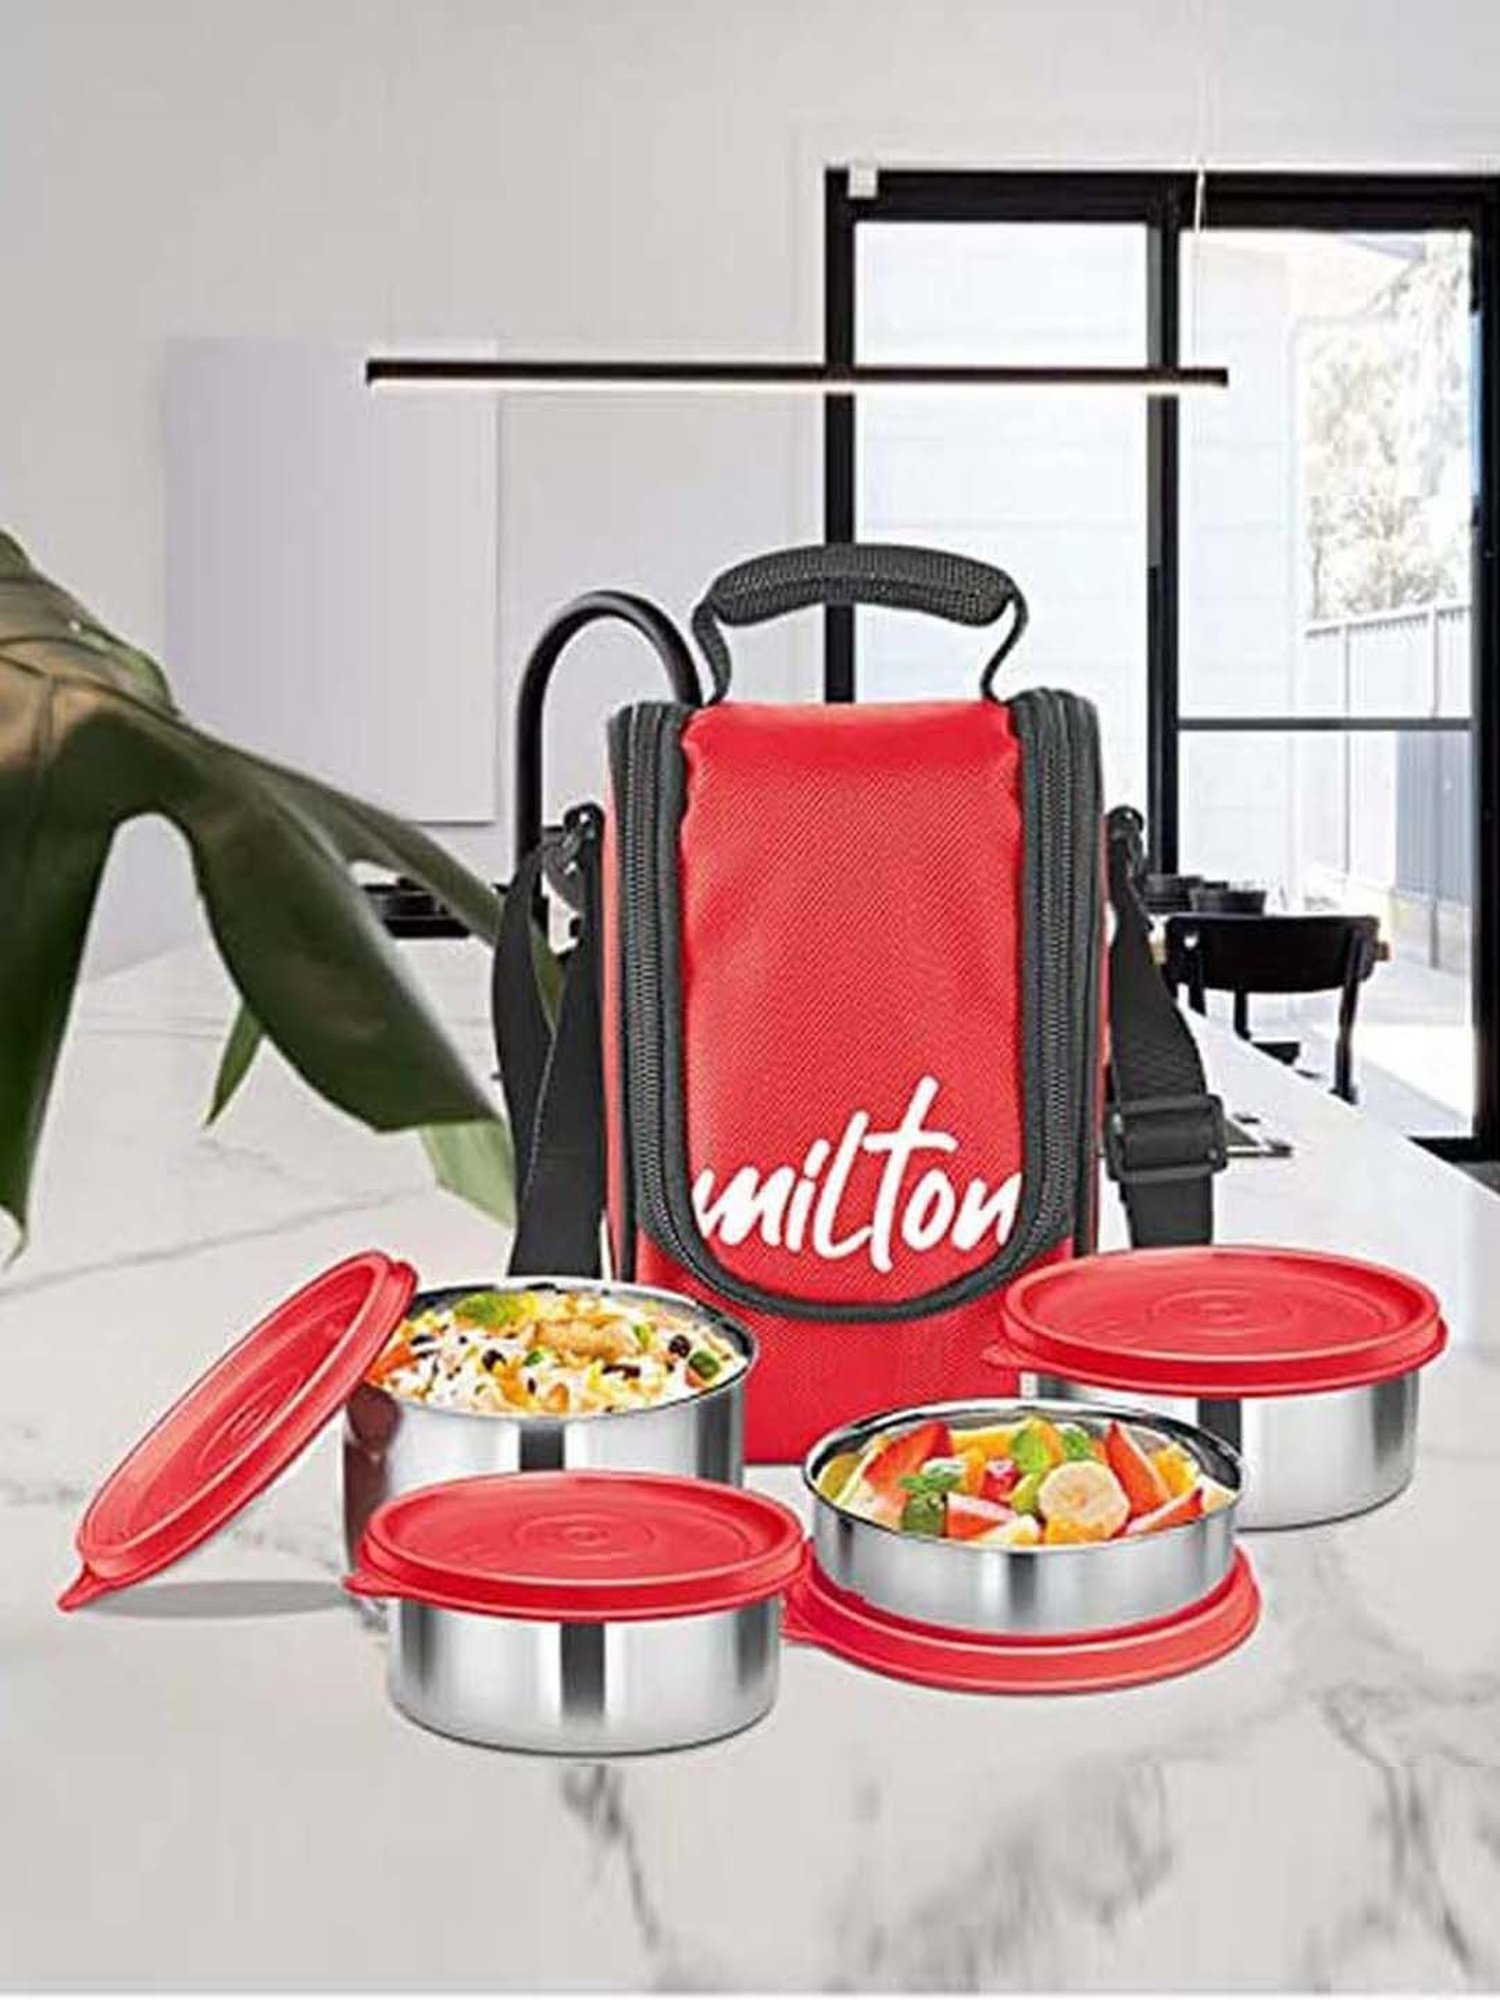 MILTON New Meal Combi Lunch Box, 3 Containers and 1 Tumbler - SVE GIFTS